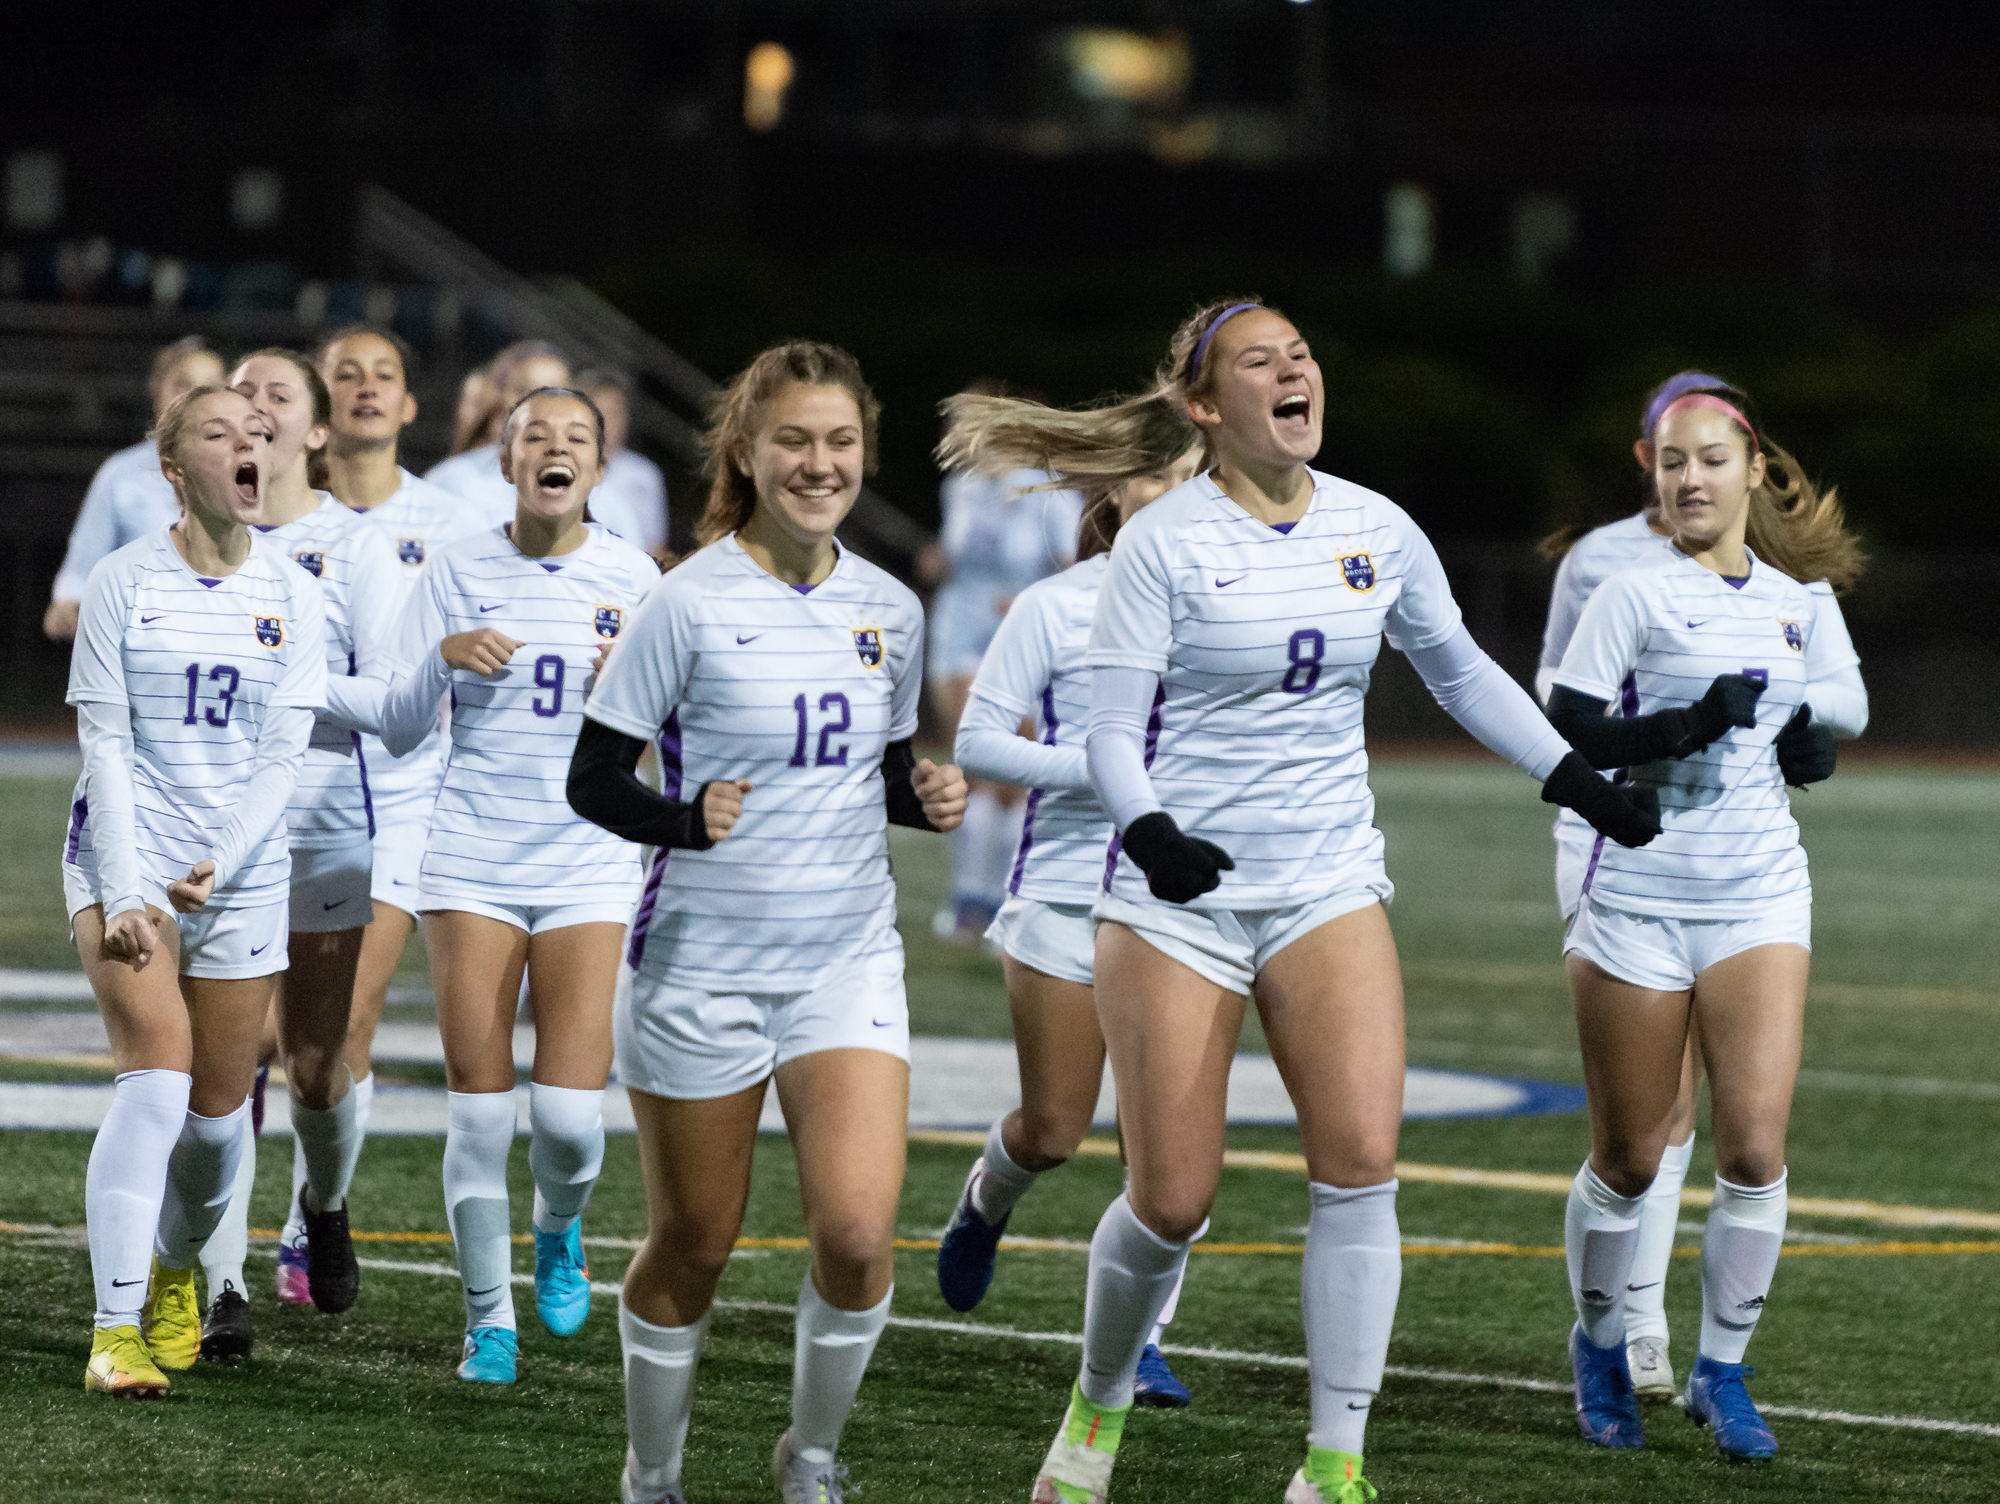 Columbia River's Maree Seibel screams as she leads the Rapids off the field before the 2A State Girls Soccer semifinals on Friday, Nov. 18, at Shoreline Stadium.